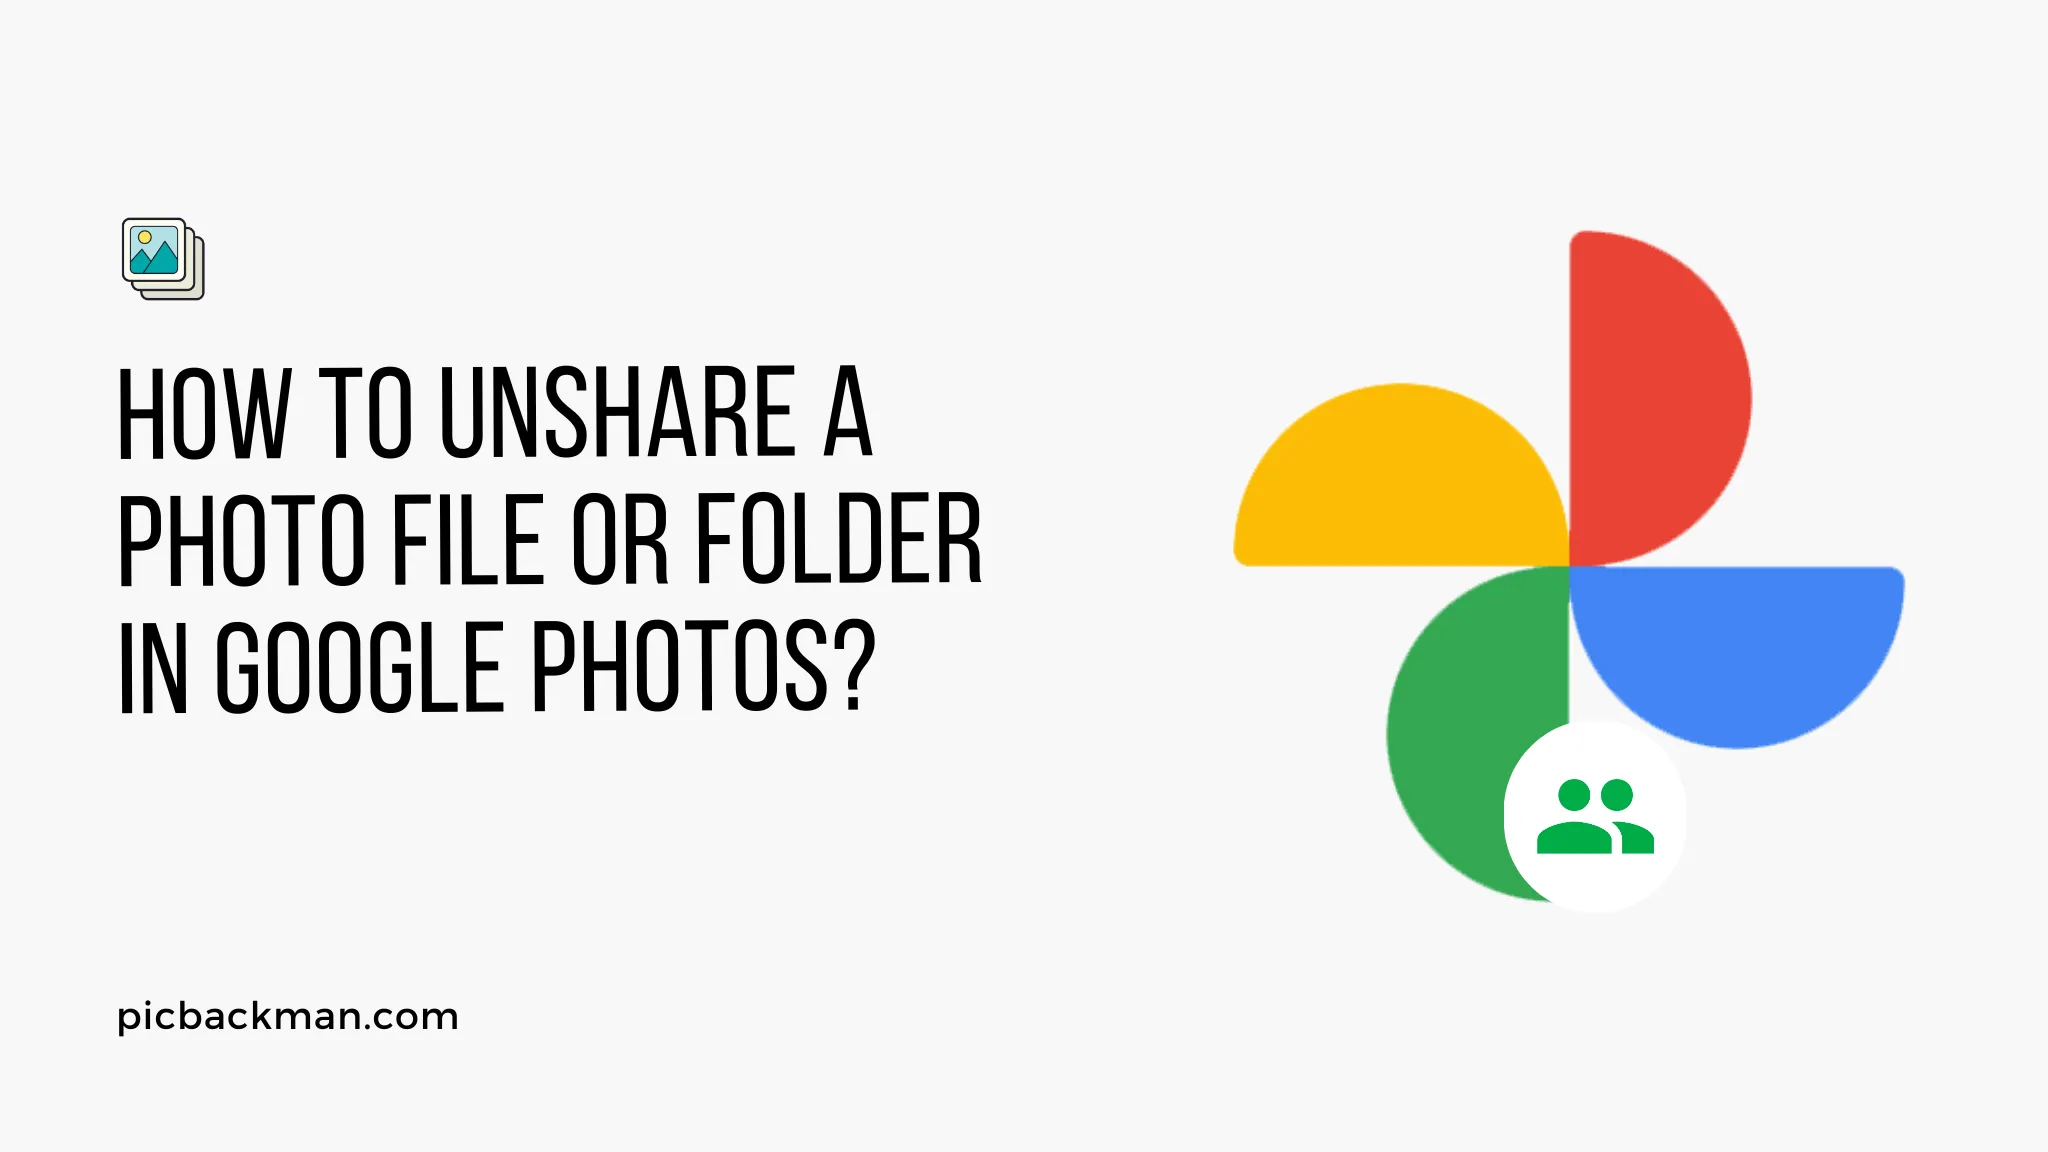 How to Unshare a Photo File or Folder in Google Photos